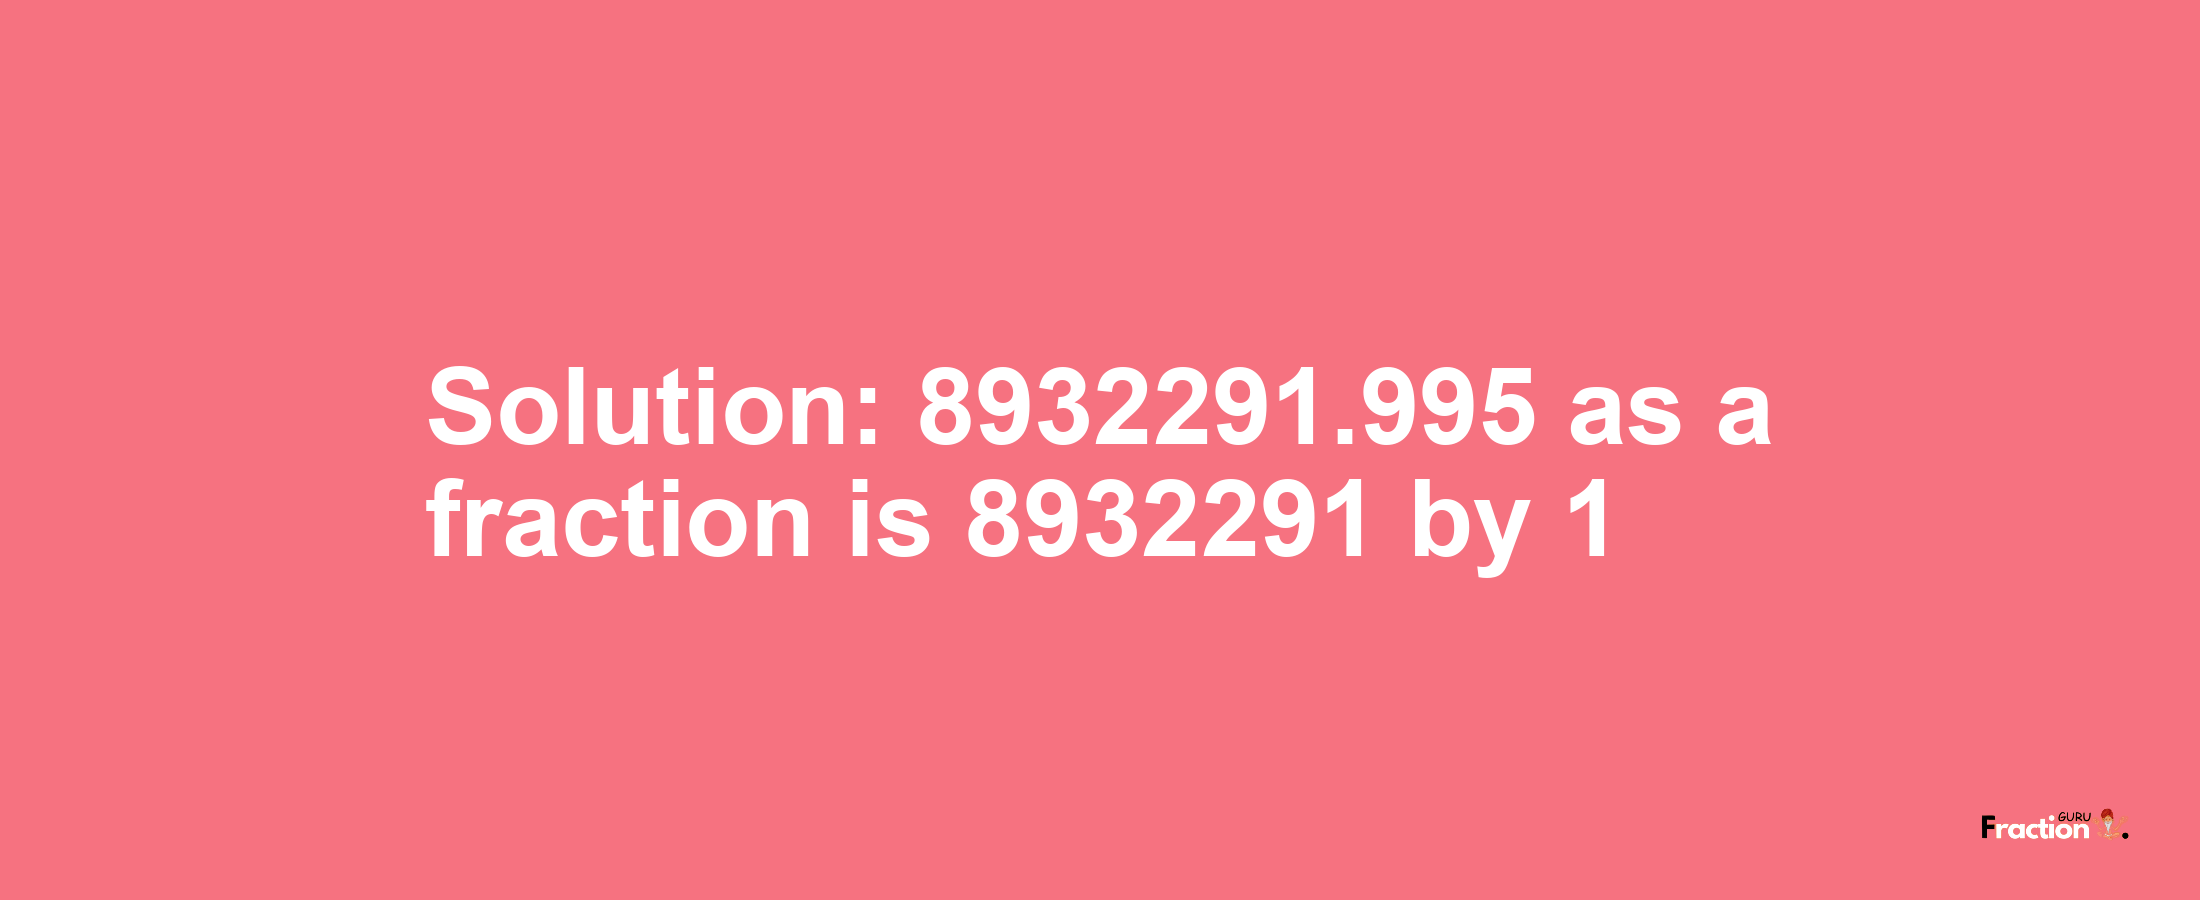 Solution:8932291.995 as a fraction is 8932291/1